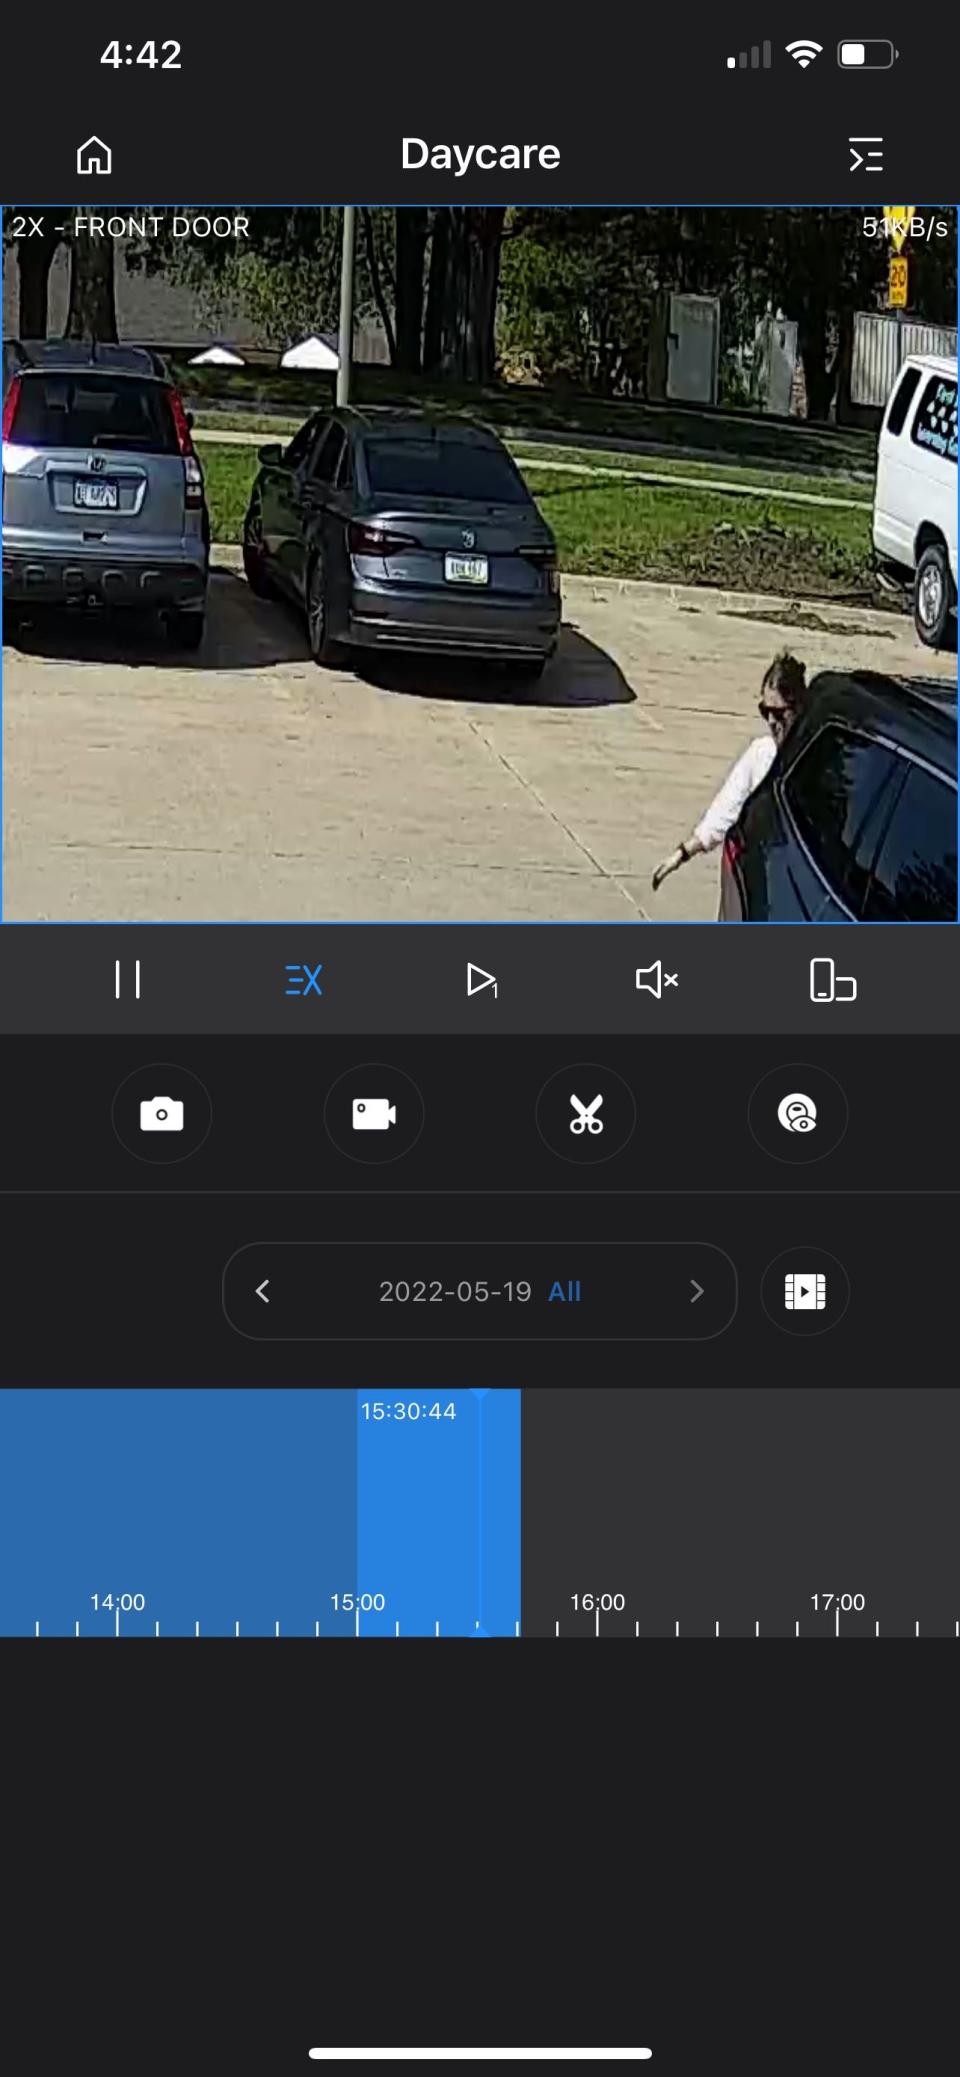 The suspect's vehicle is seen parked in the First Steps Learning Center parking lot on May 19, 2022.